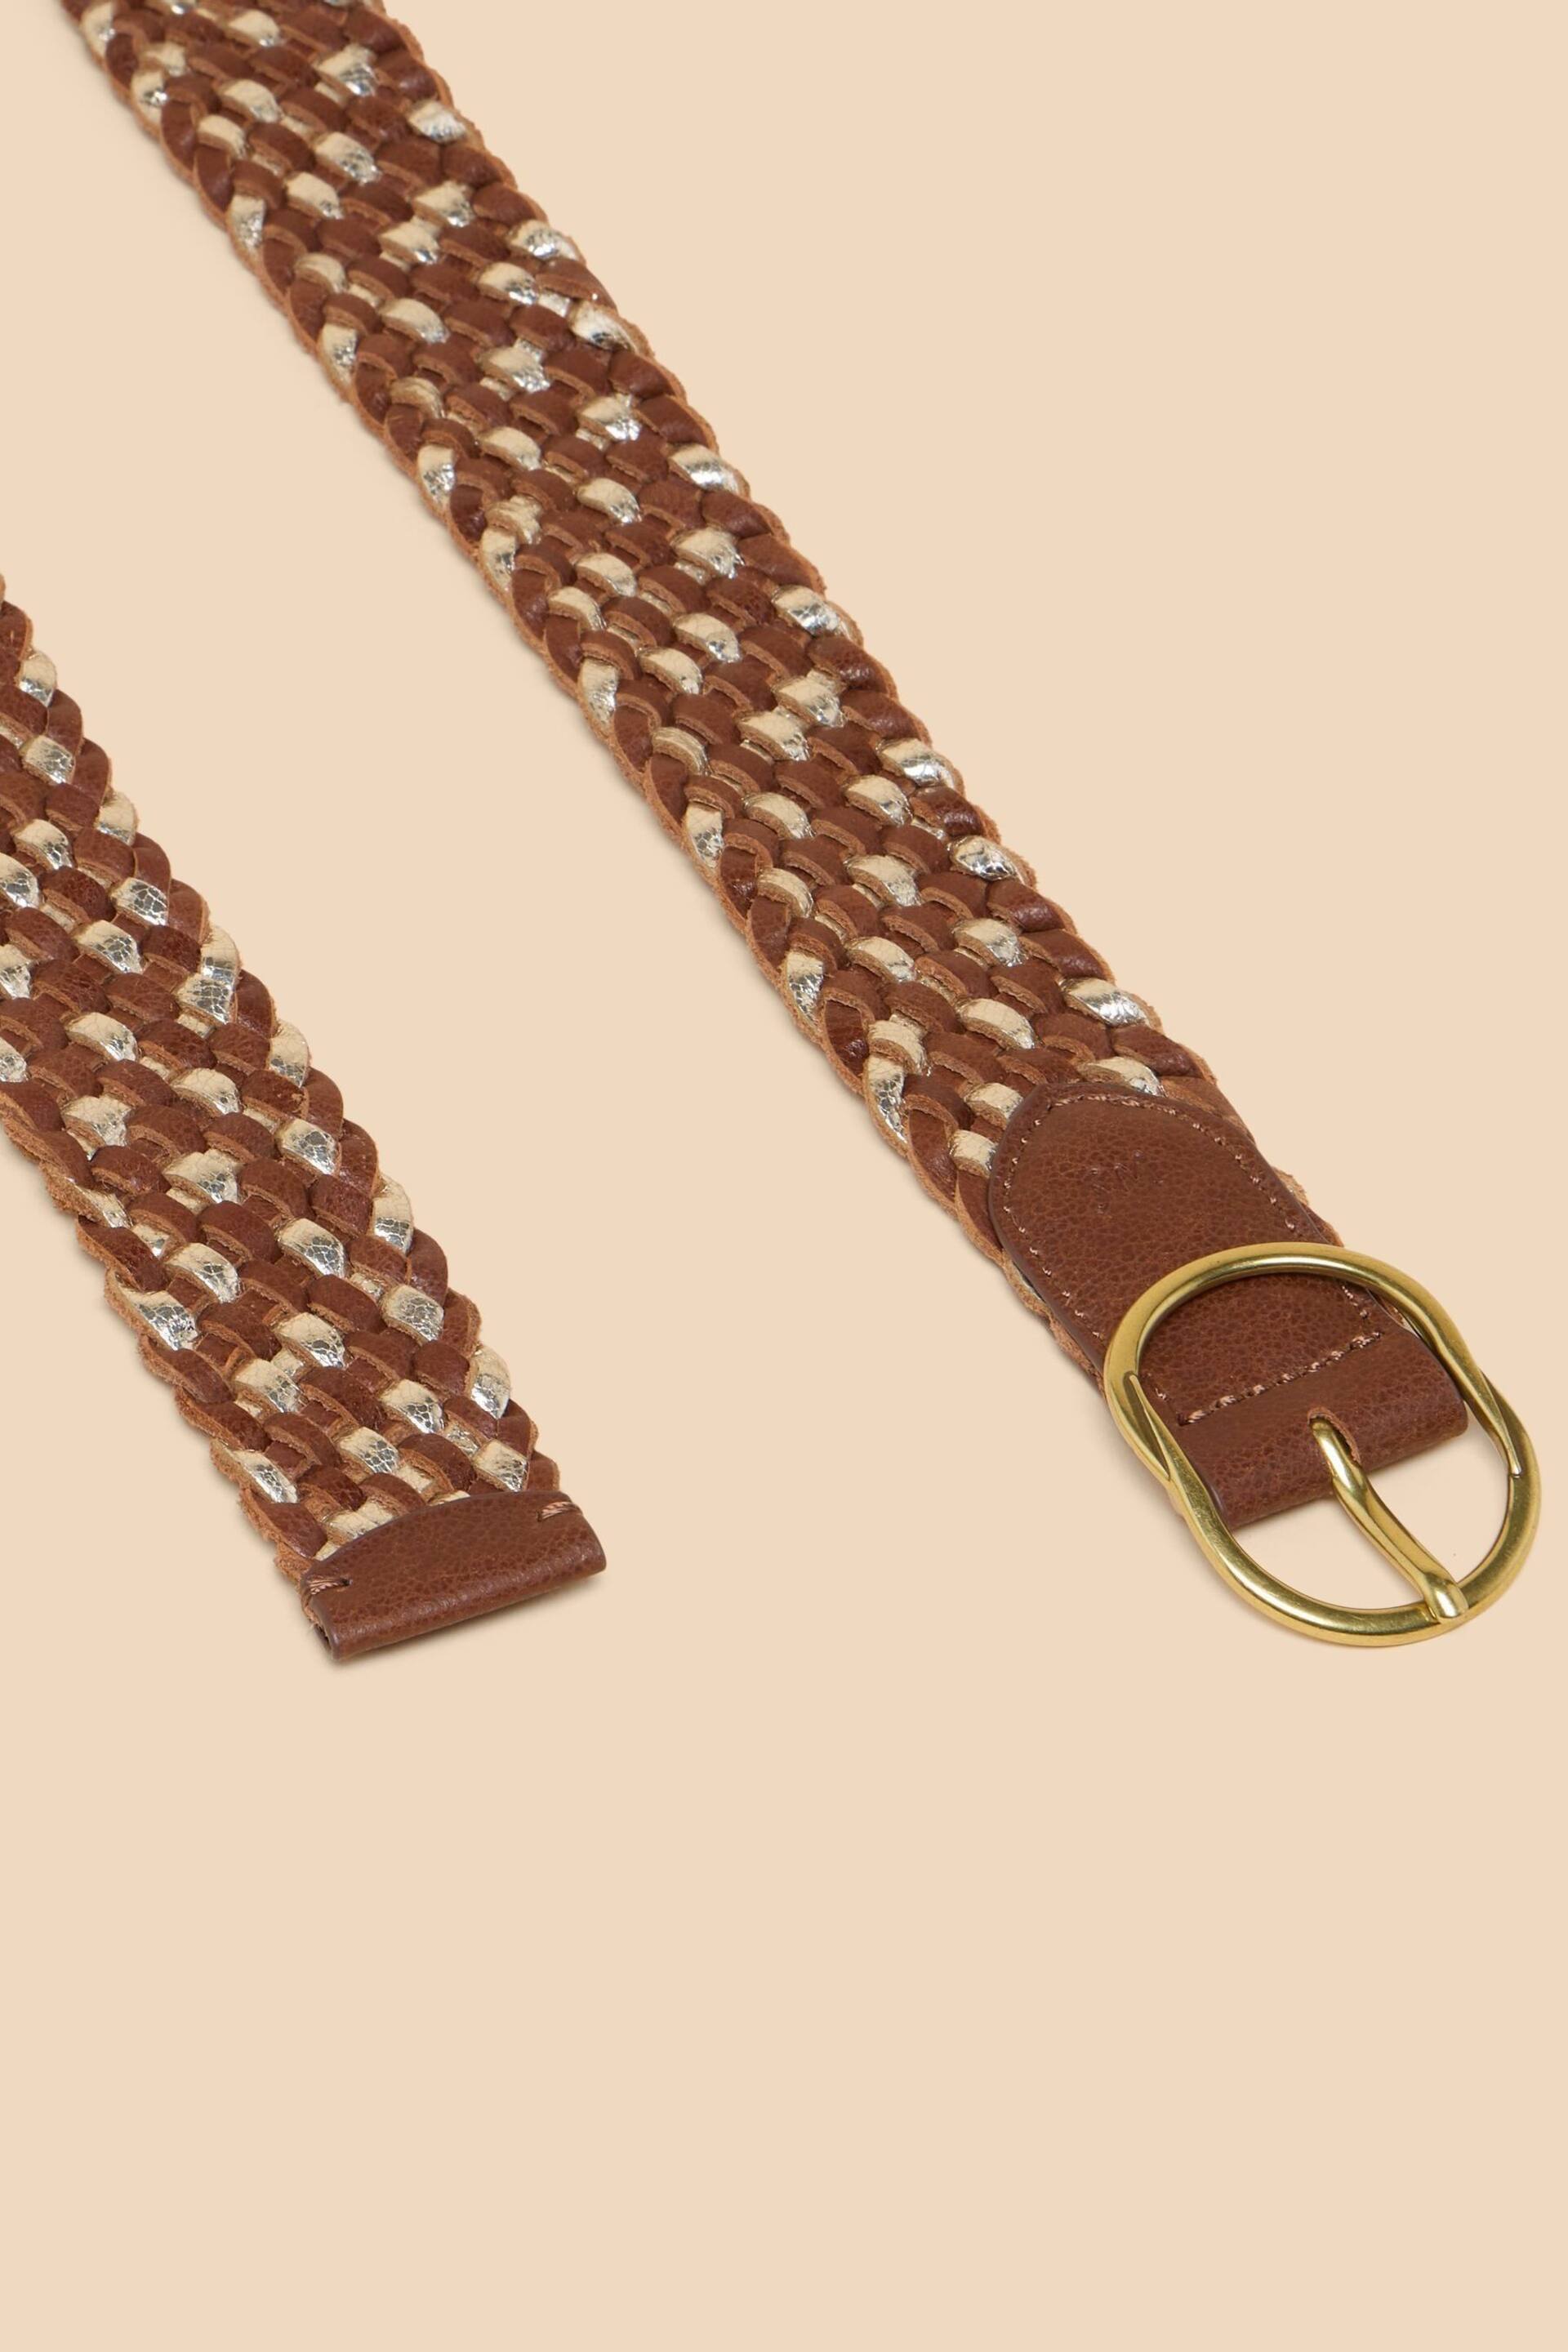 White Stuff Brown Leather Weave Belt - Image 3 of 3